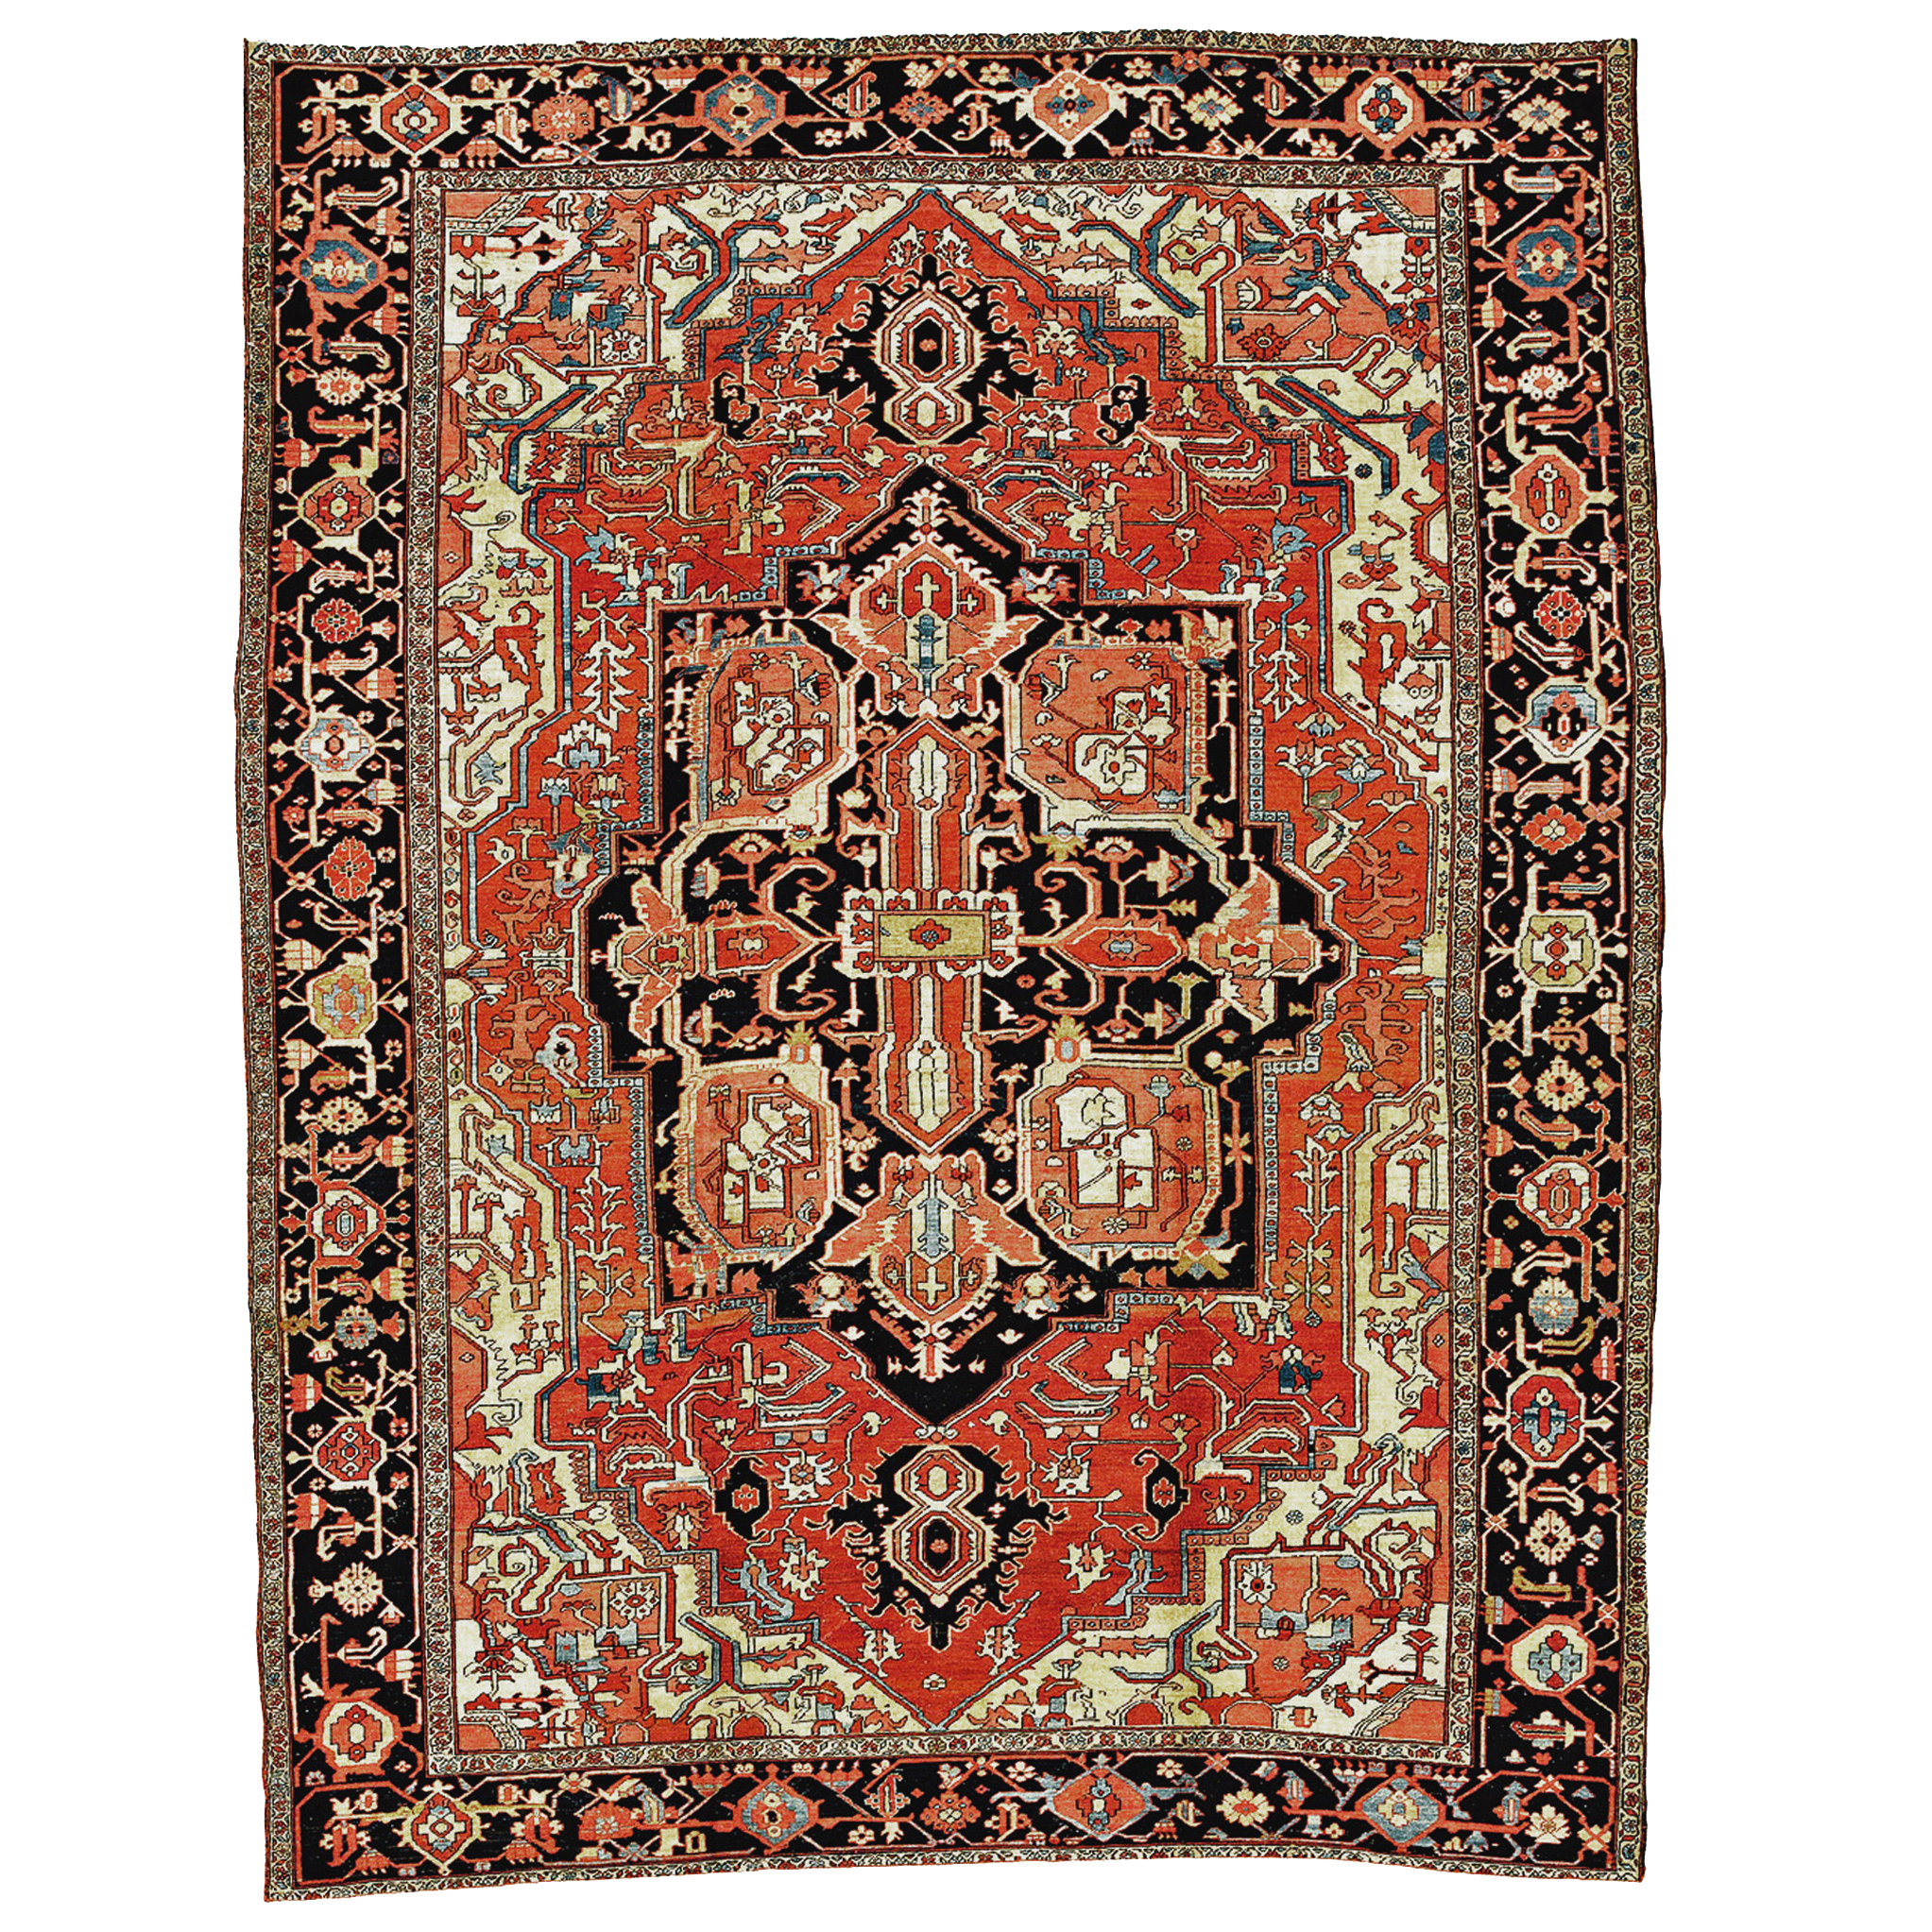 An antique Persian Heriz "Serapi" carpet with a navy blue and coral medallion on a salmon color field. Light yellow corner spandrels and a navy blue "Turtle" design border frame the field, circa 1900. Douglas Stock Gallery specializes in antique Persian Heriz "Serapi" carpet, antique rugs Boston,MA area